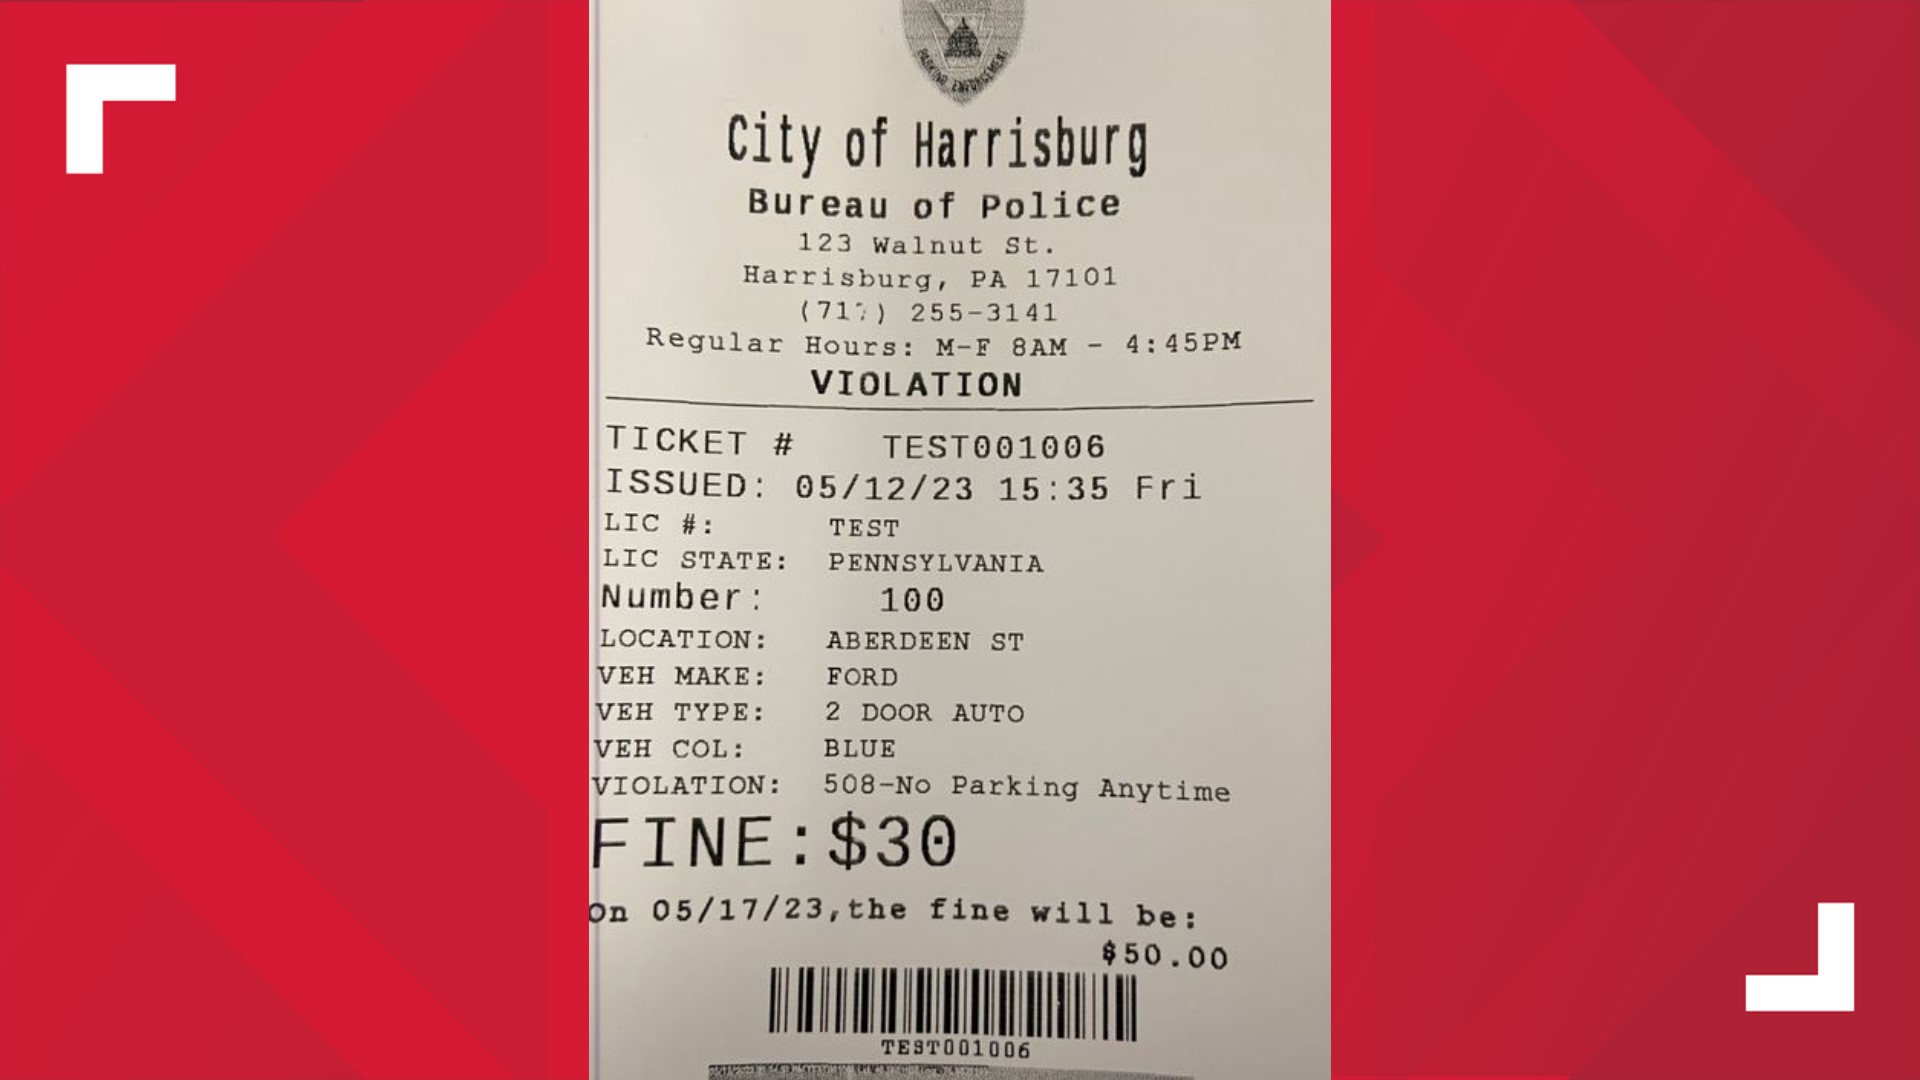 On Monday, June 5, all City of Harrisburg-issued parking tickets will be printed, and no longer hand written, city officials said.